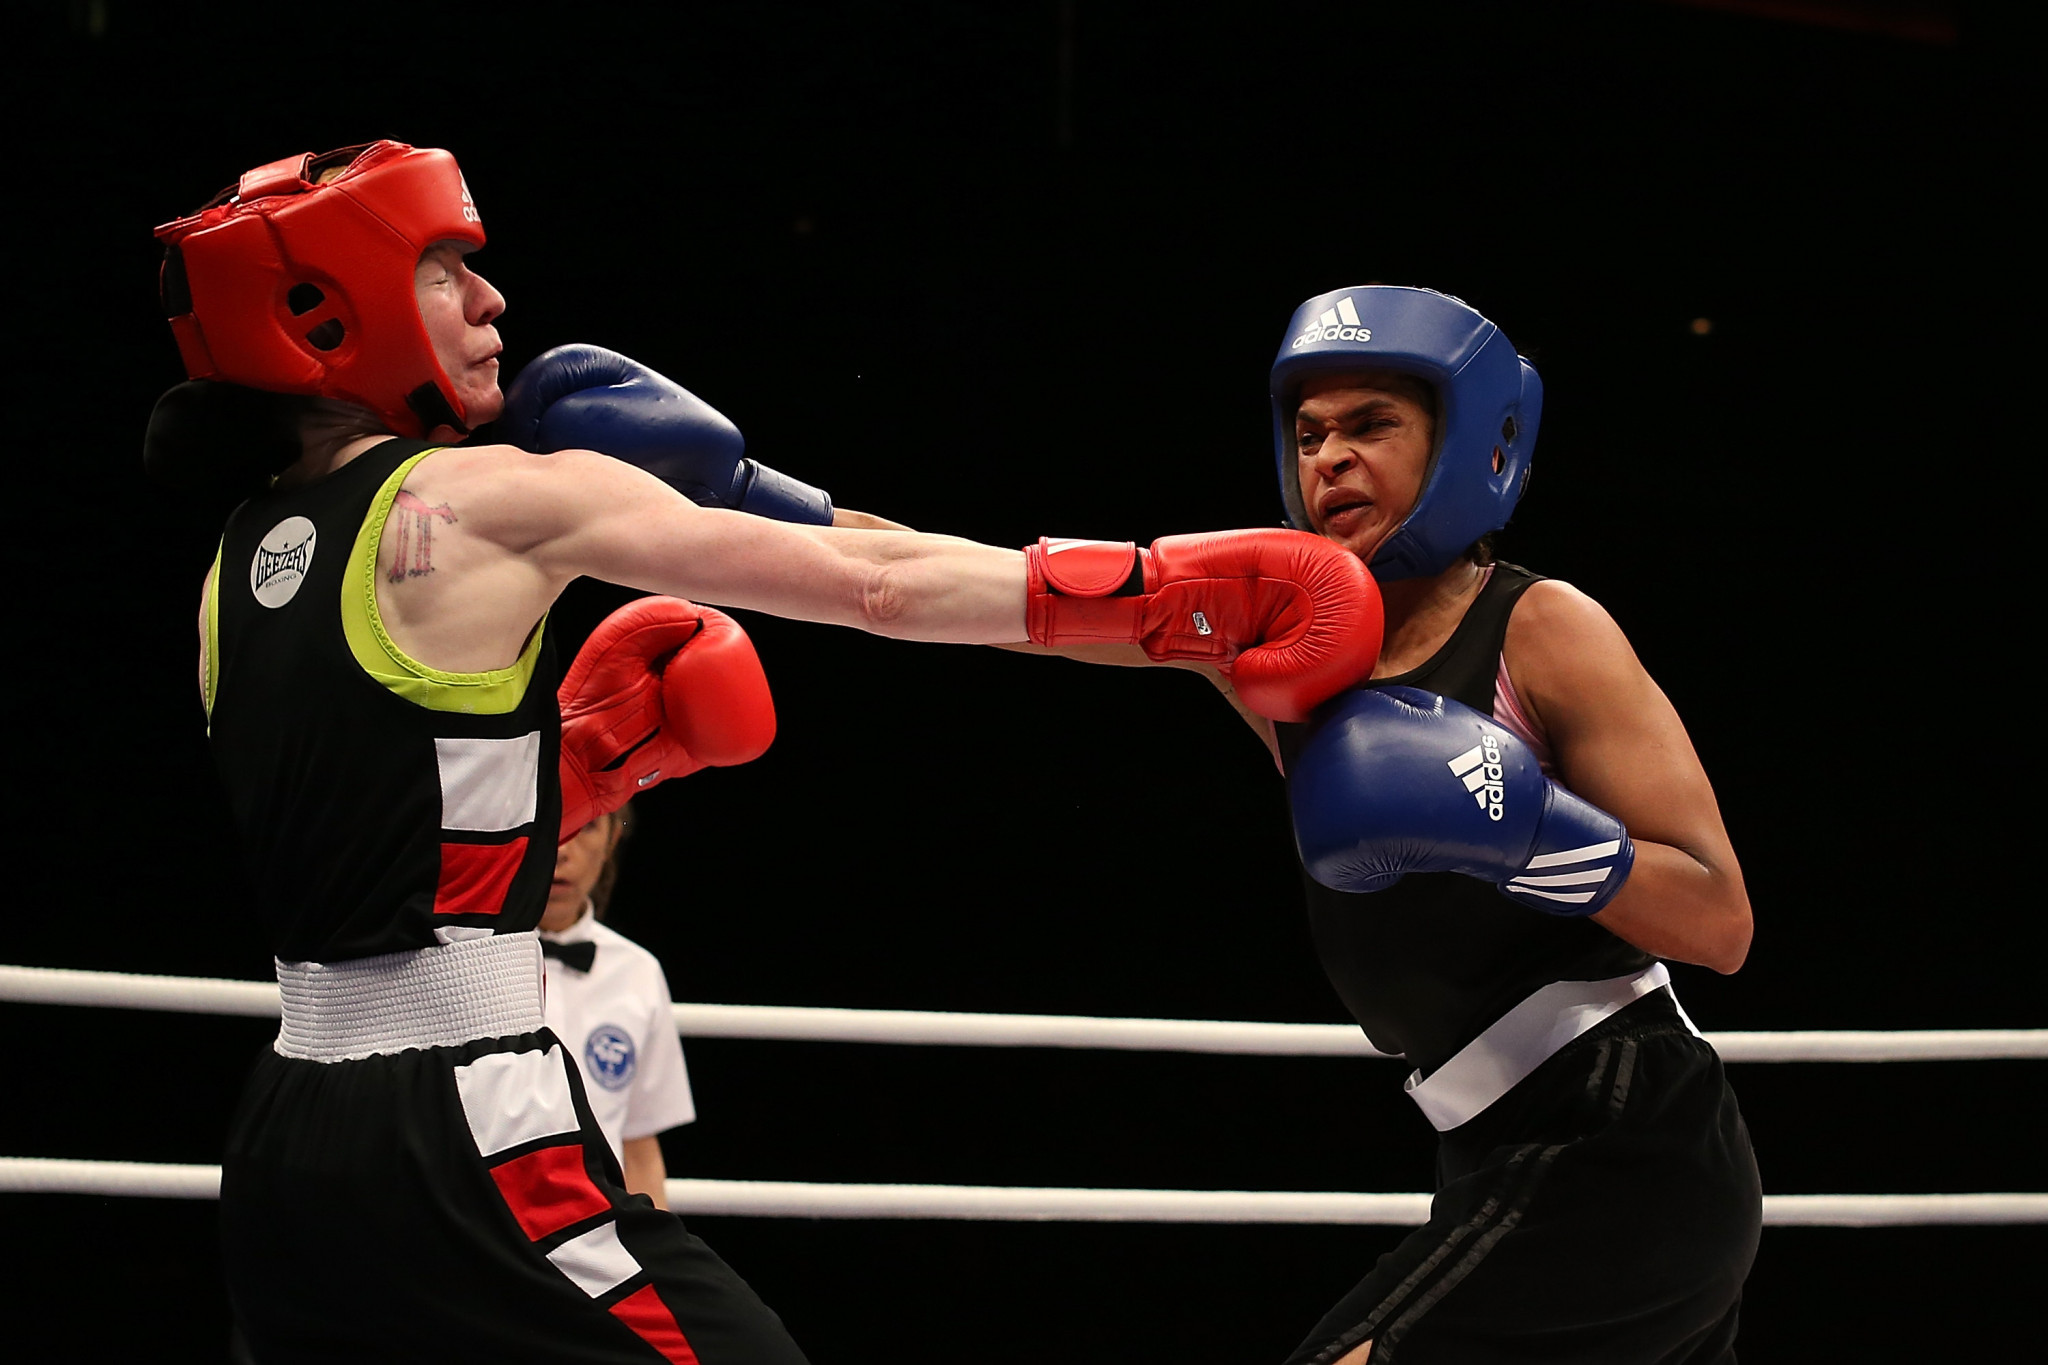 Somalian star Ali reaches quarter-finals at African Olympic boxing qualifier